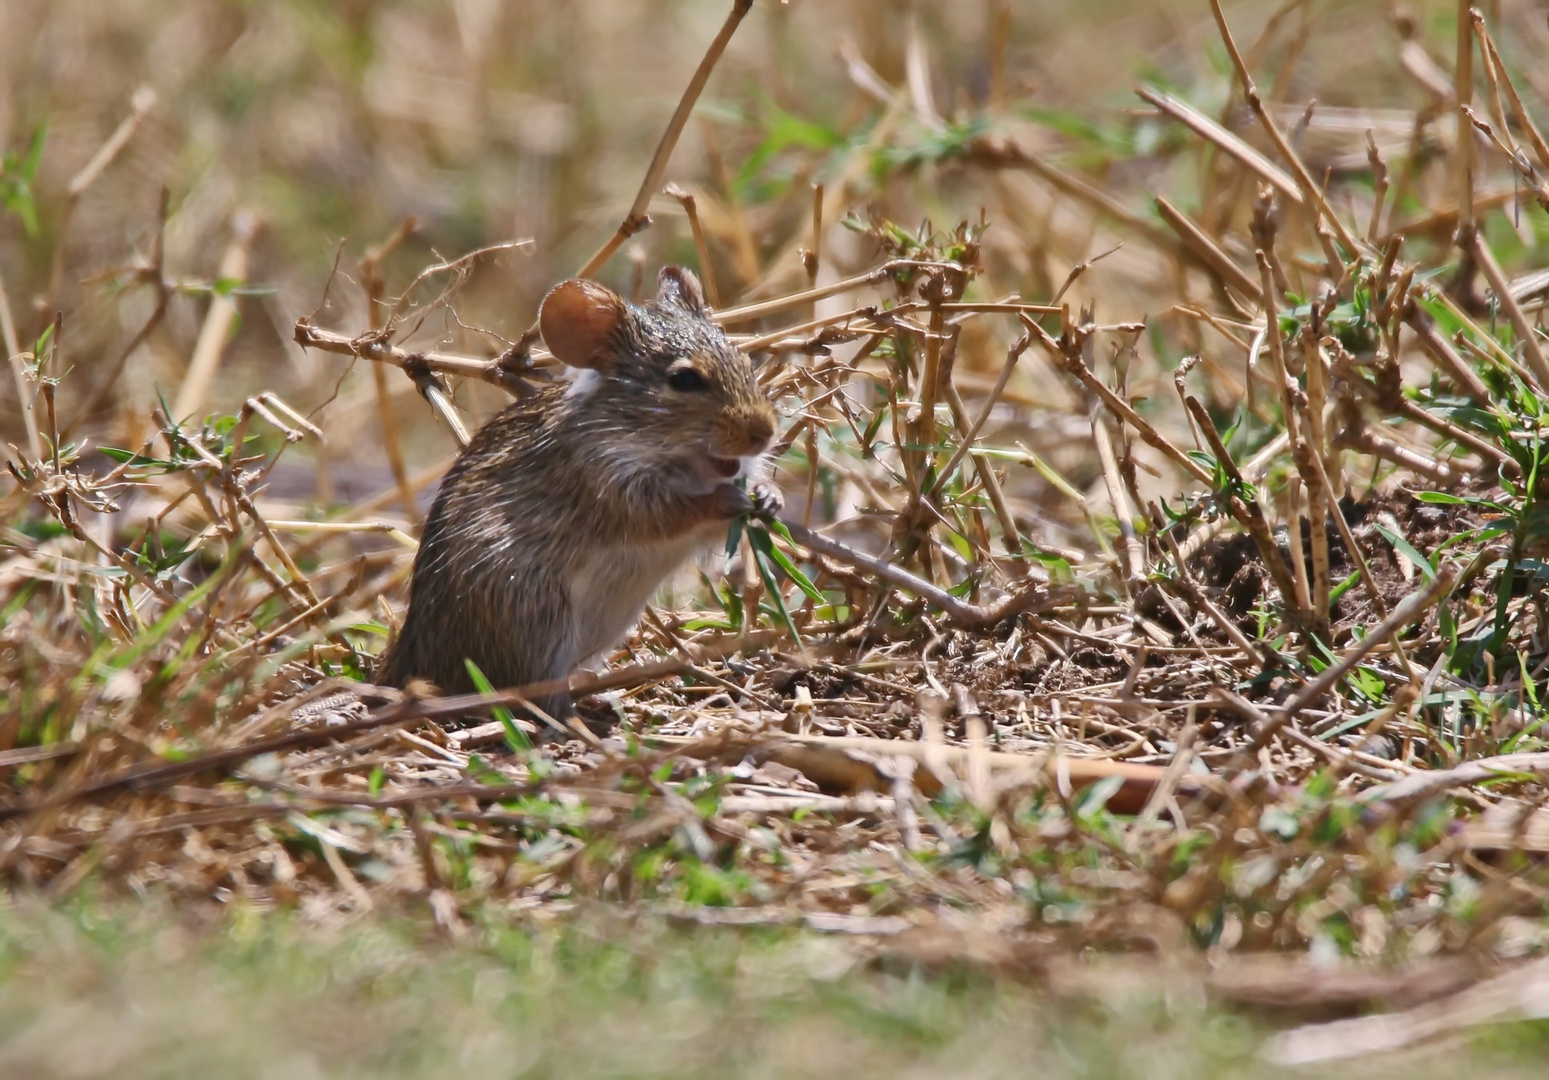 Nile Grass Rat,Arvicanthis niloticus